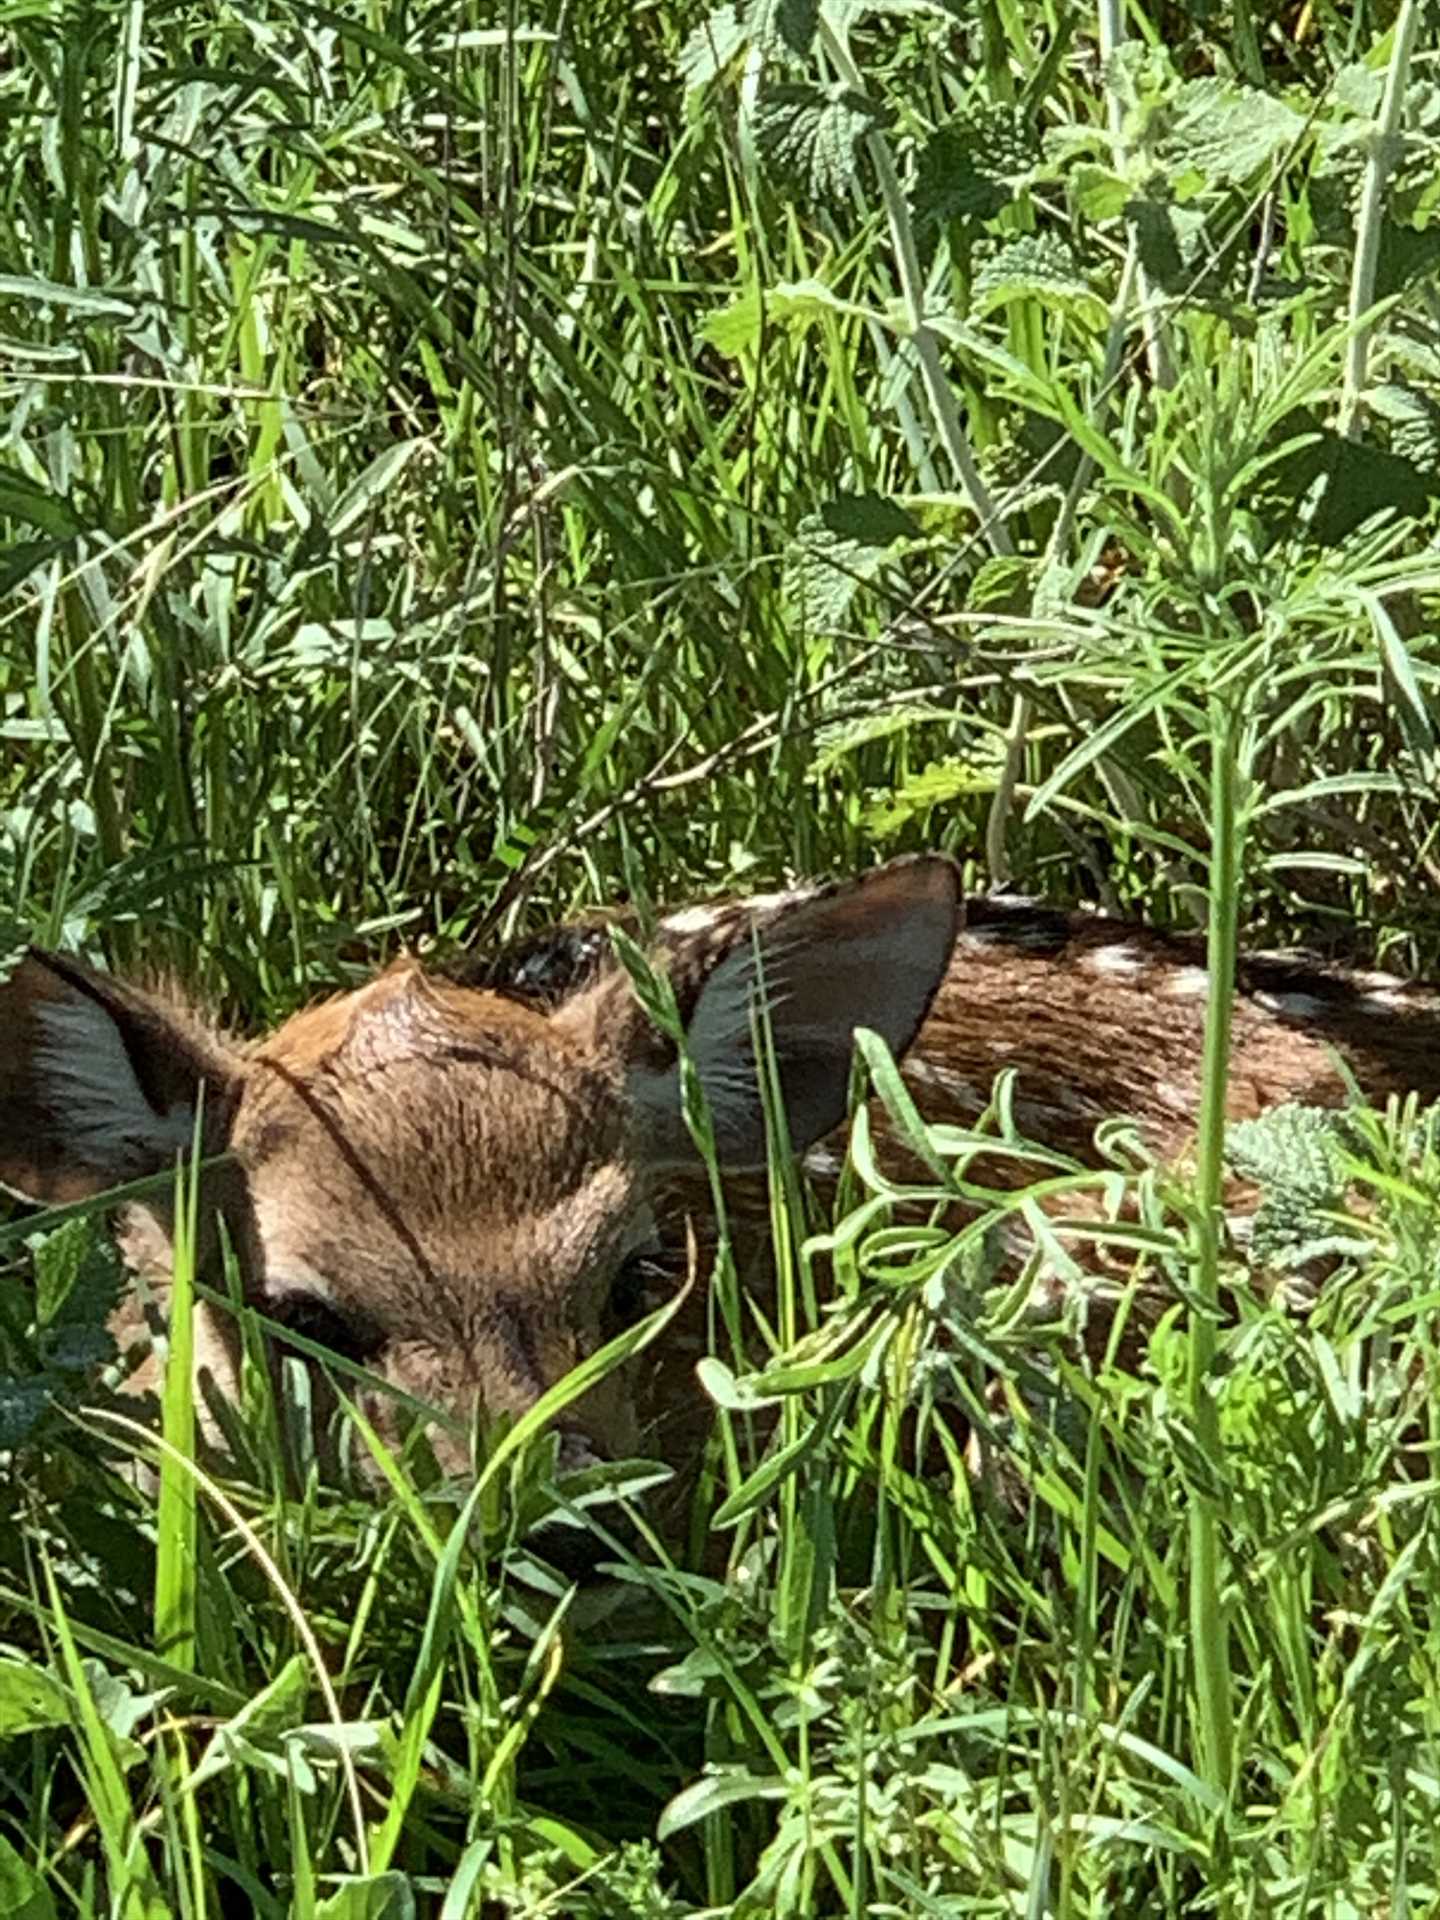                                                 This shy little fella is an Axis deer, one of the many species of local animals you'll see on the grounds.